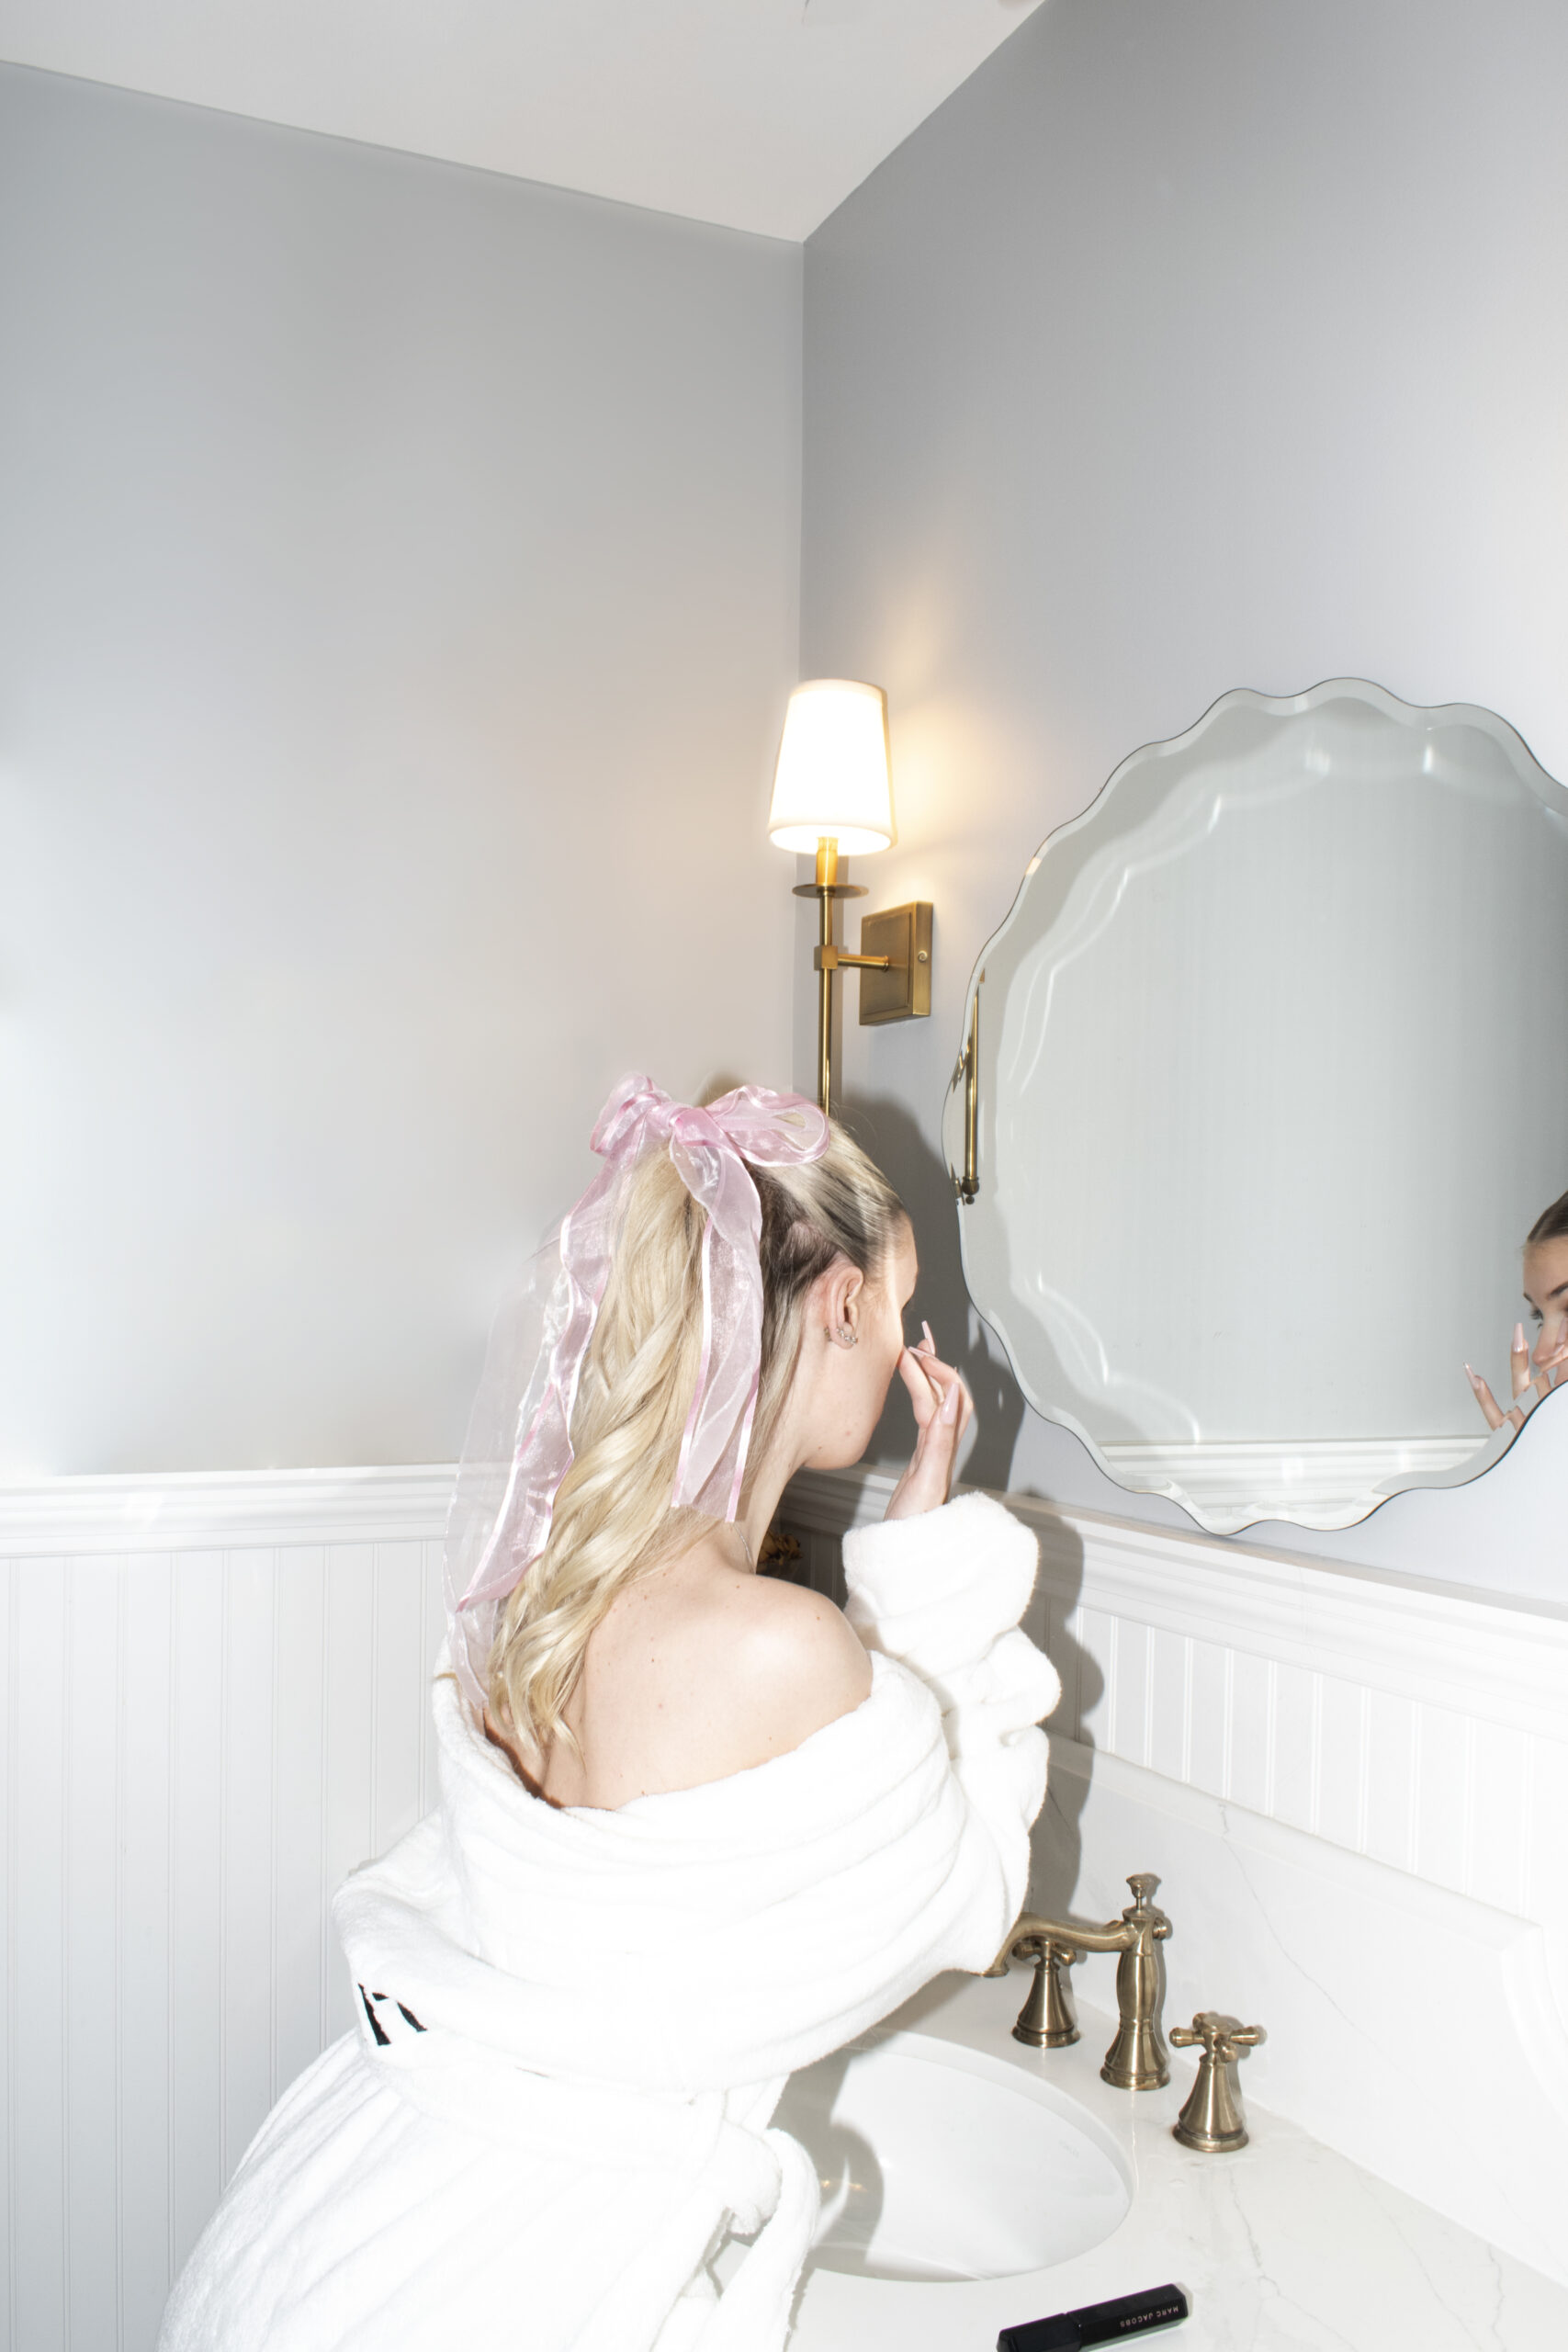 Photograph of a blonde woman wearing a white robe with a pink bow in her hair putting makeup on in front of the mirror.